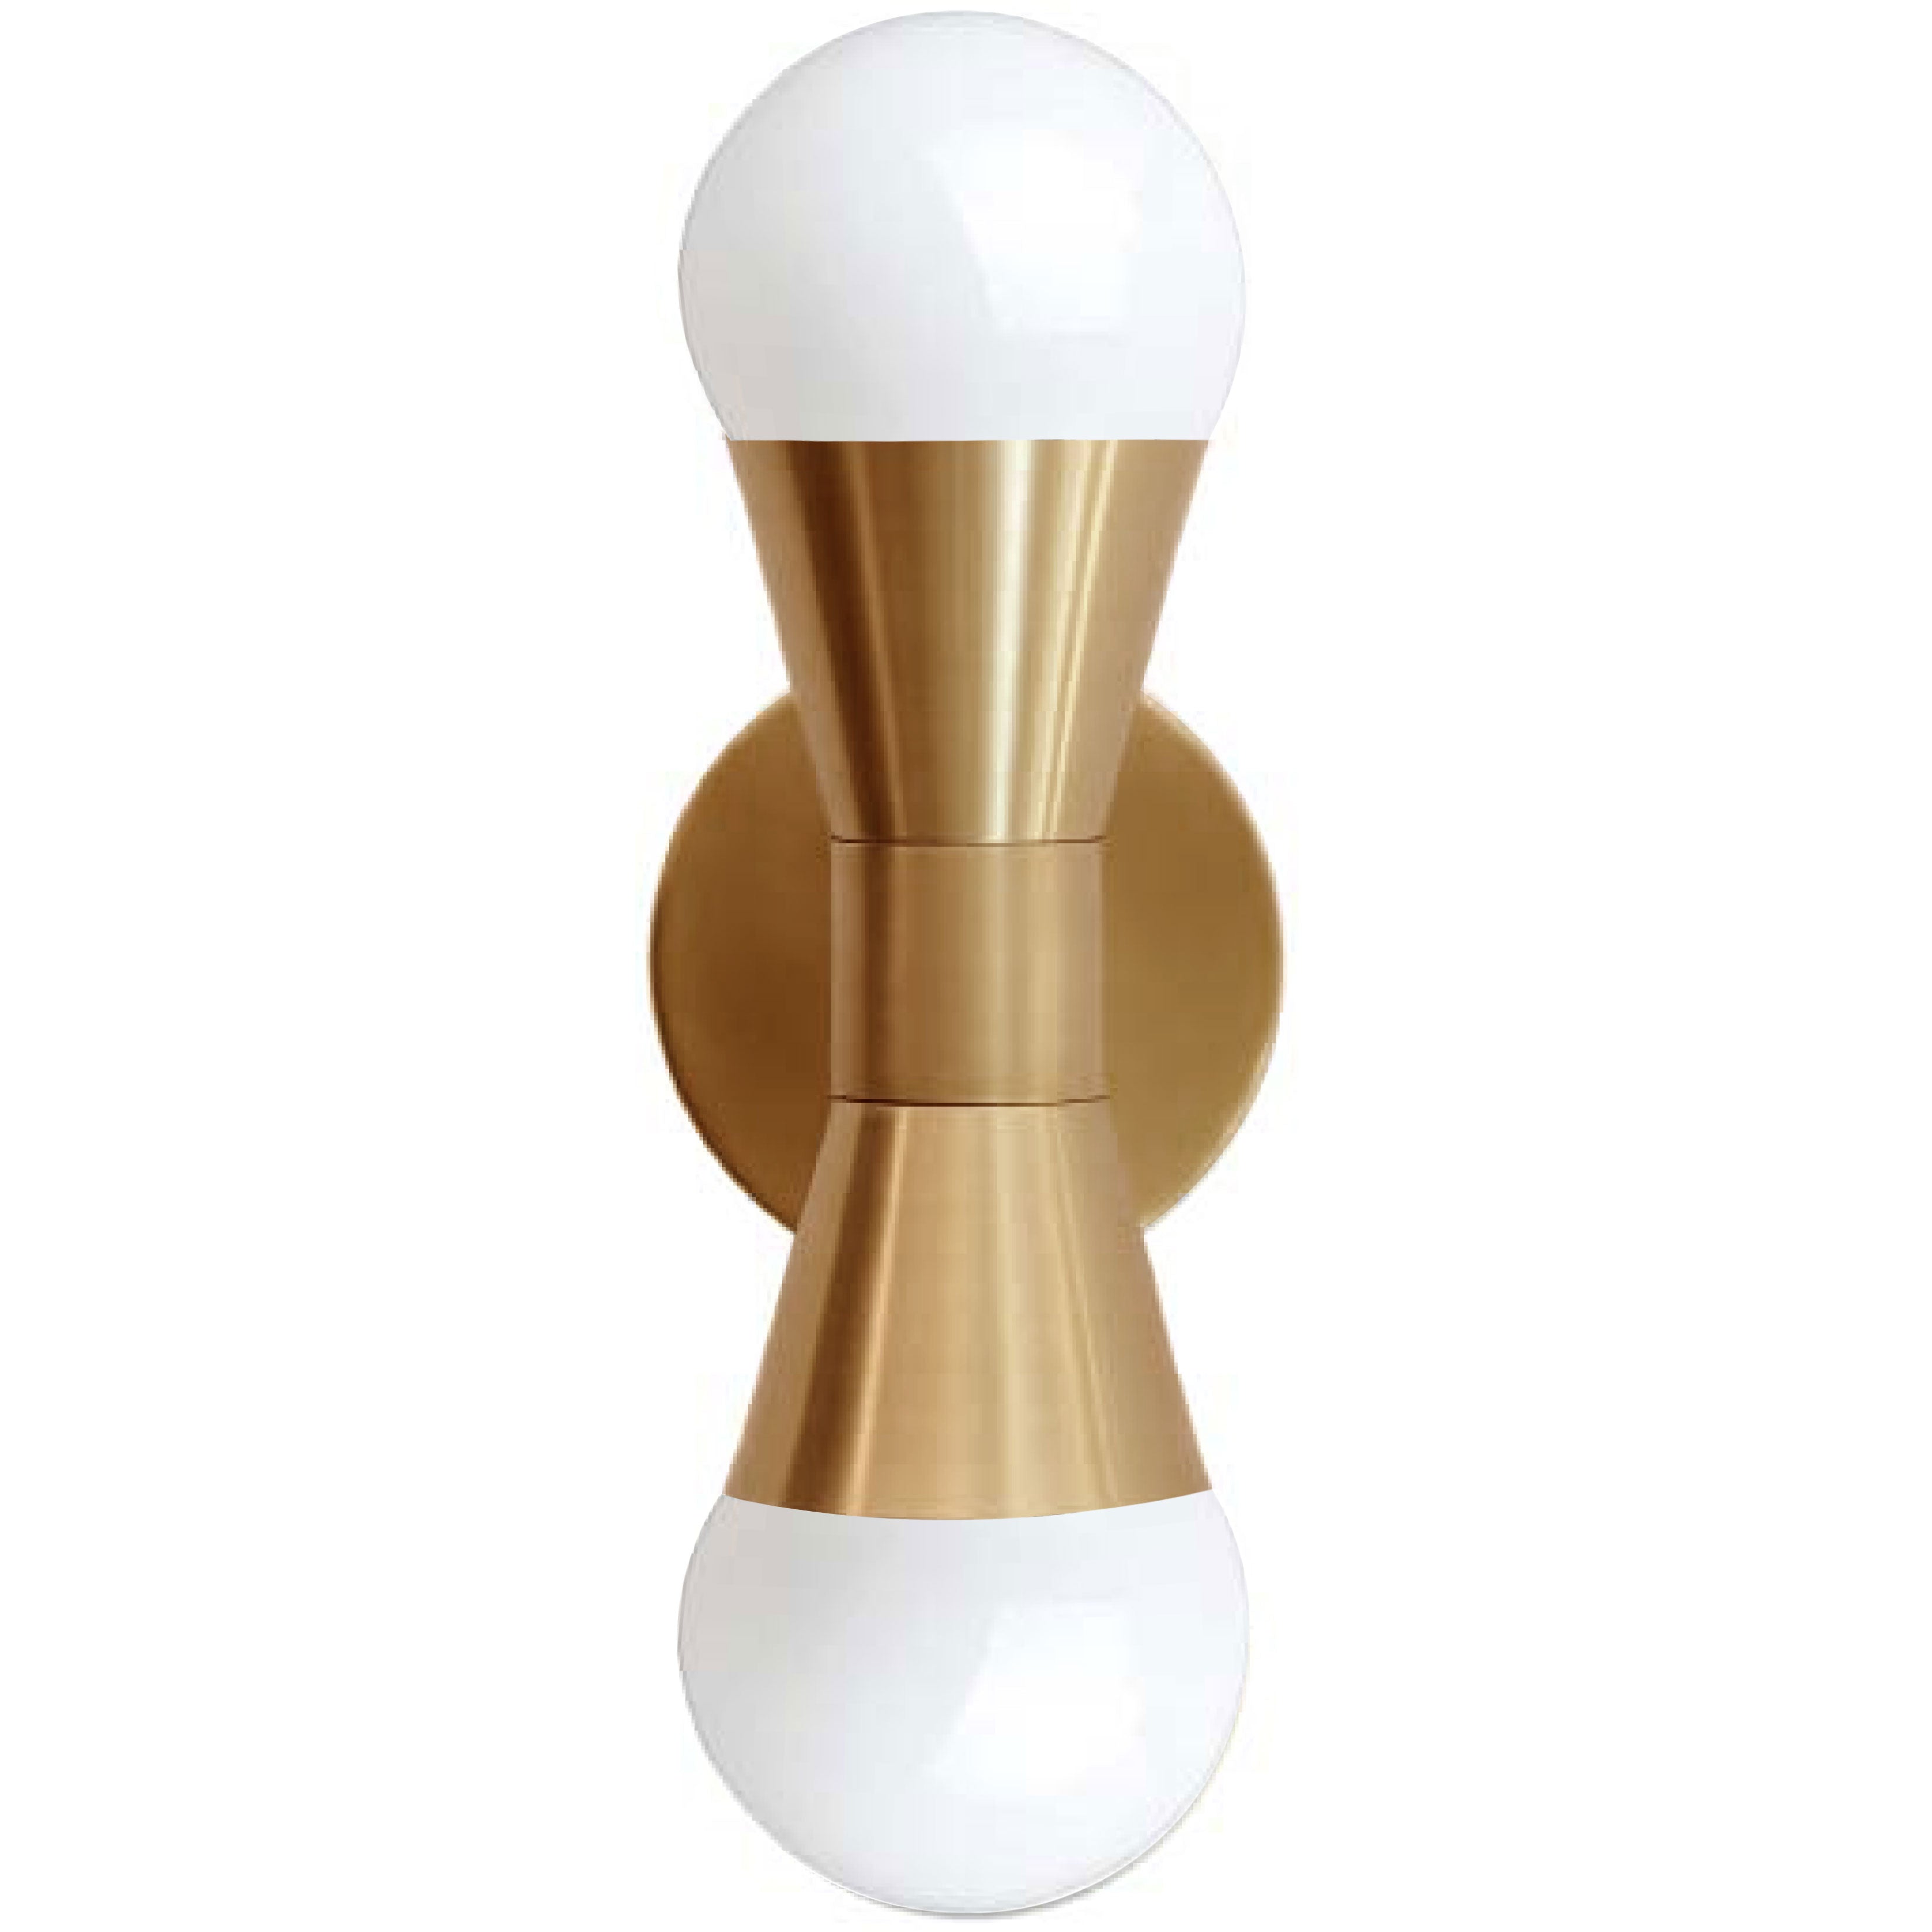 FORTUNA Wall sconce Gold - FOR-72W-AGB | DAINOLITE